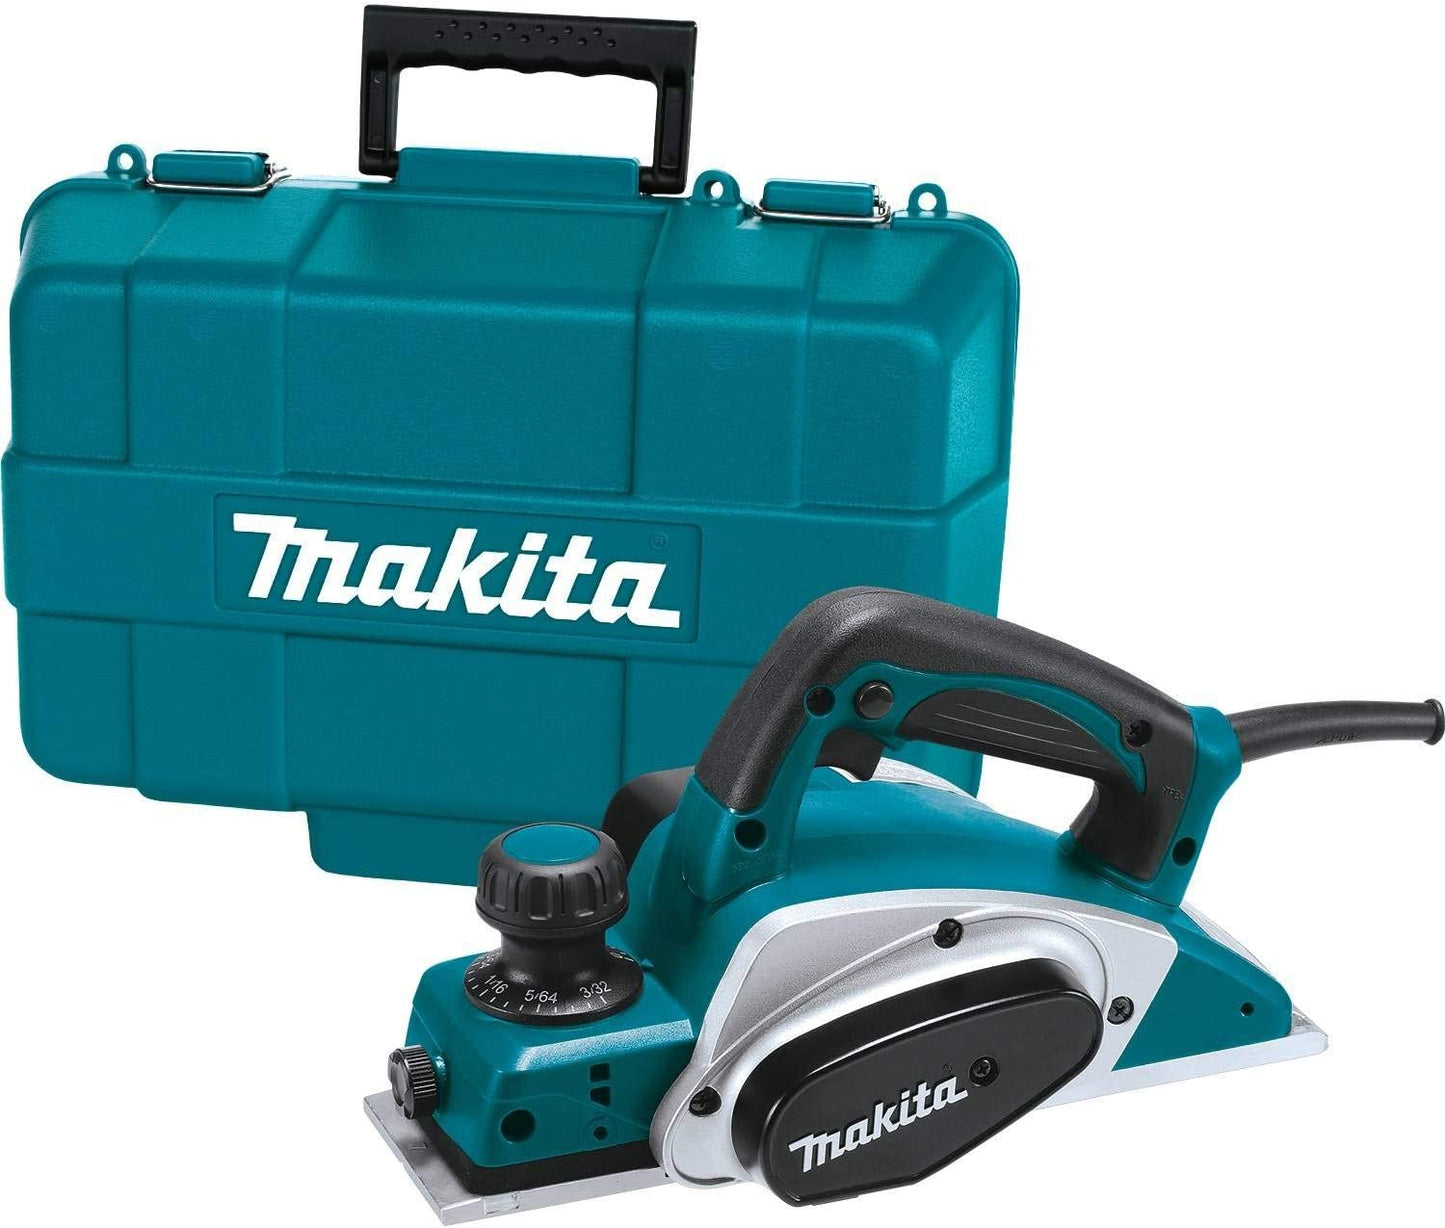 Makita KP0800K 3‑1/4" Planer, with Tool Case